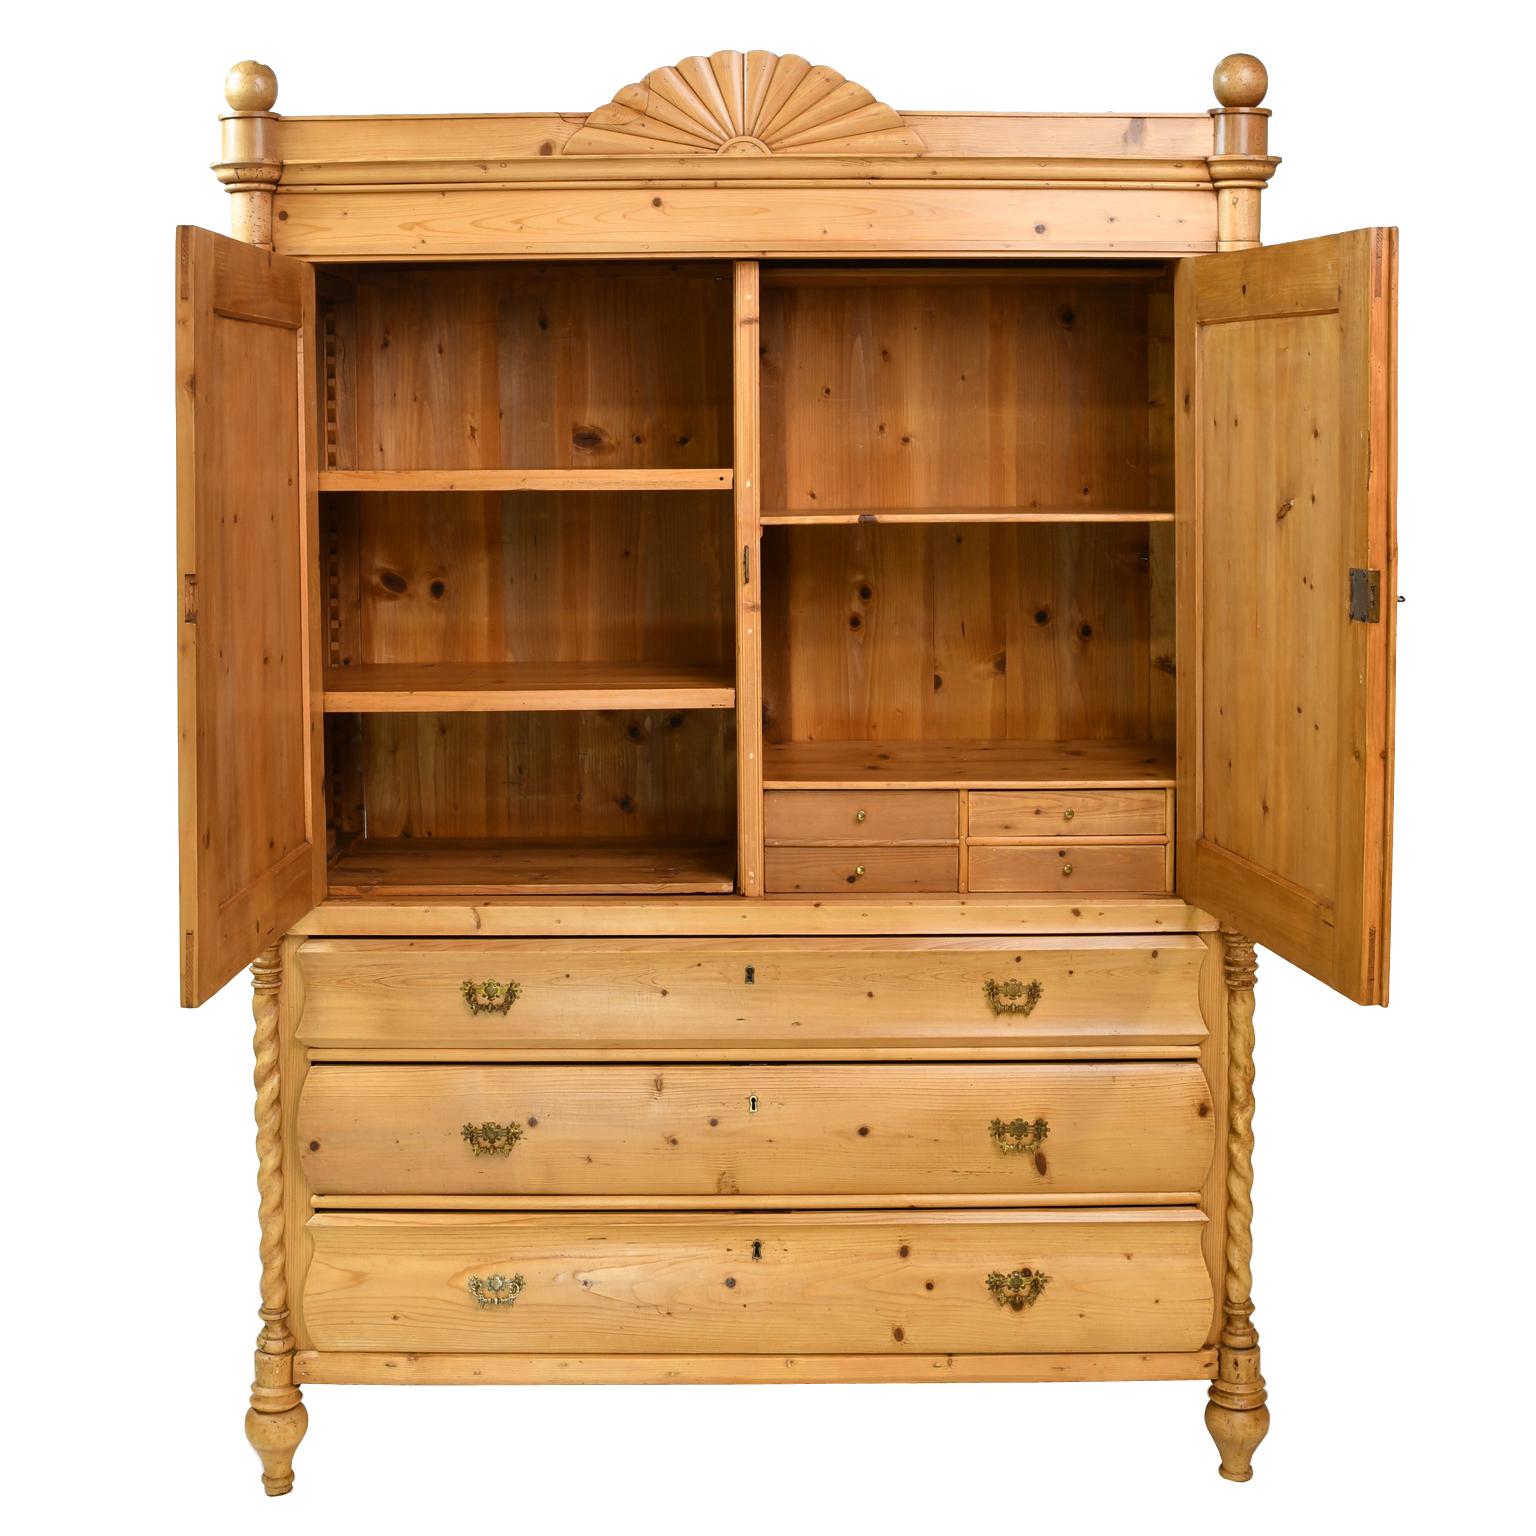 It is seldom we see an antique pine linen press of this quality and charm! From the Netherlands, a lovely linen press in light honey-colored pine with two paneled doors over three long storage drawers, featuring a carved sunburst pediment top